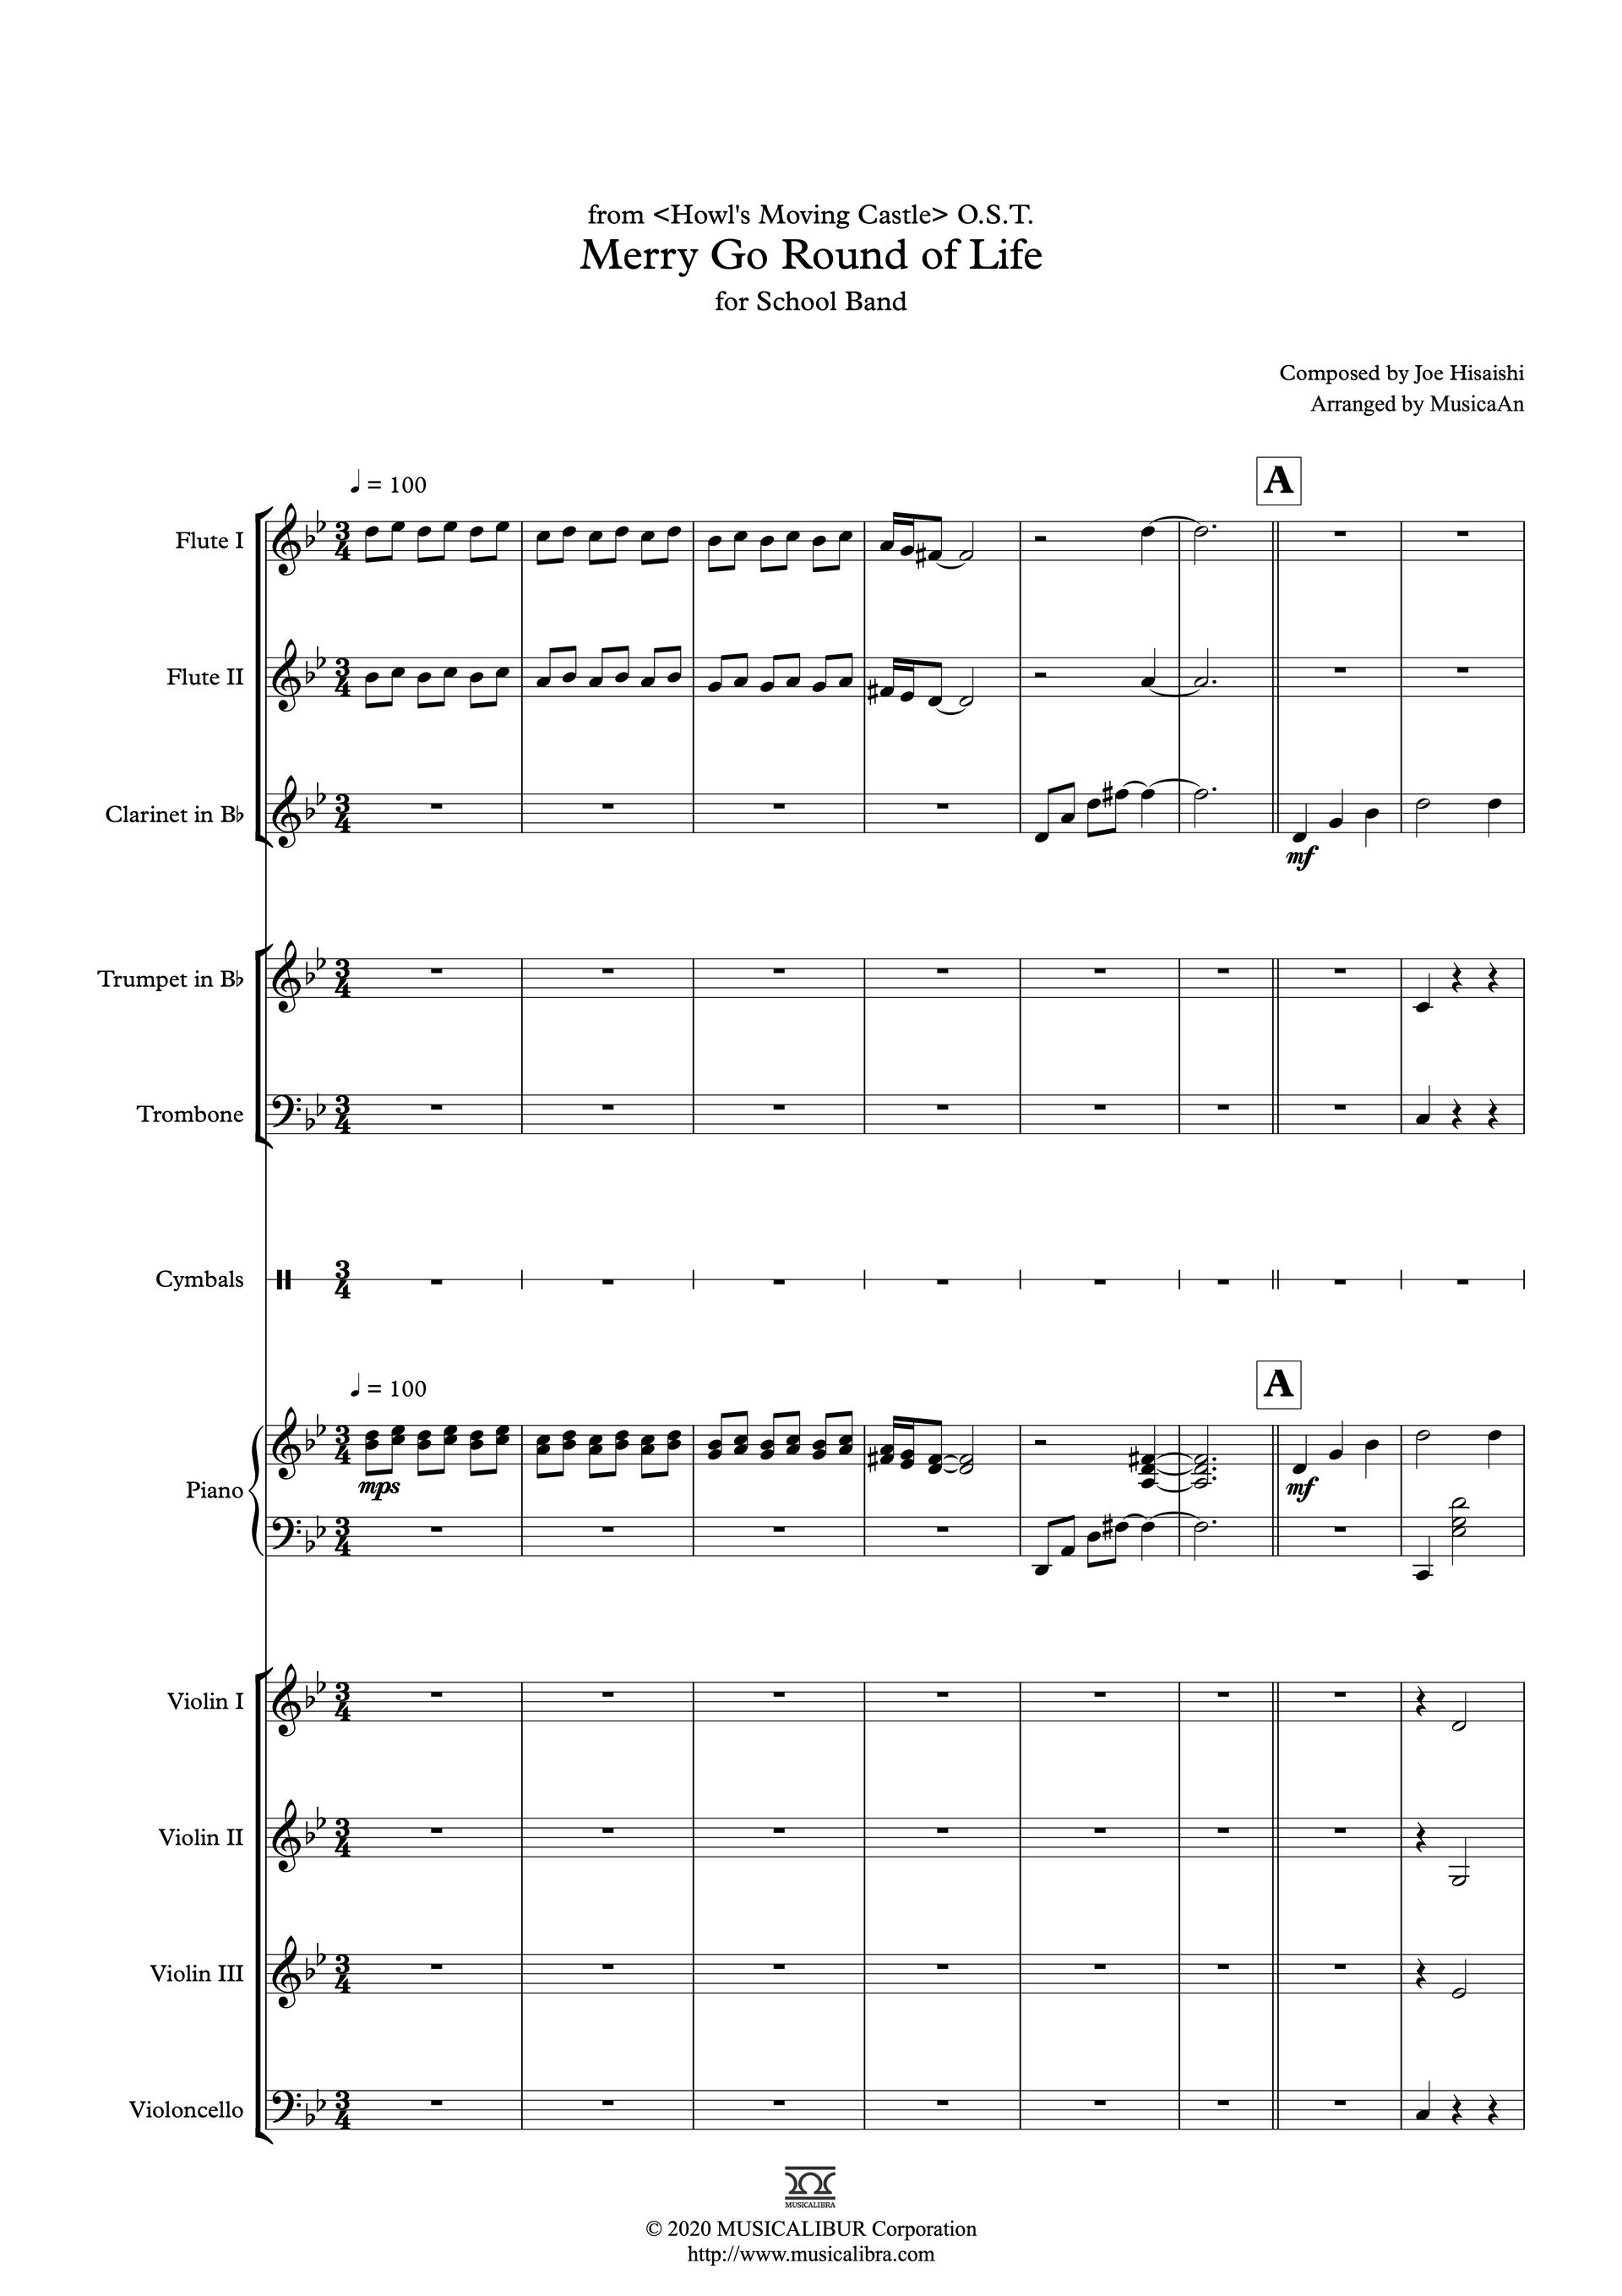 Sheet music of Merry Go Round of Life(Howl's Moving Castle) arranged for school band preview page 1